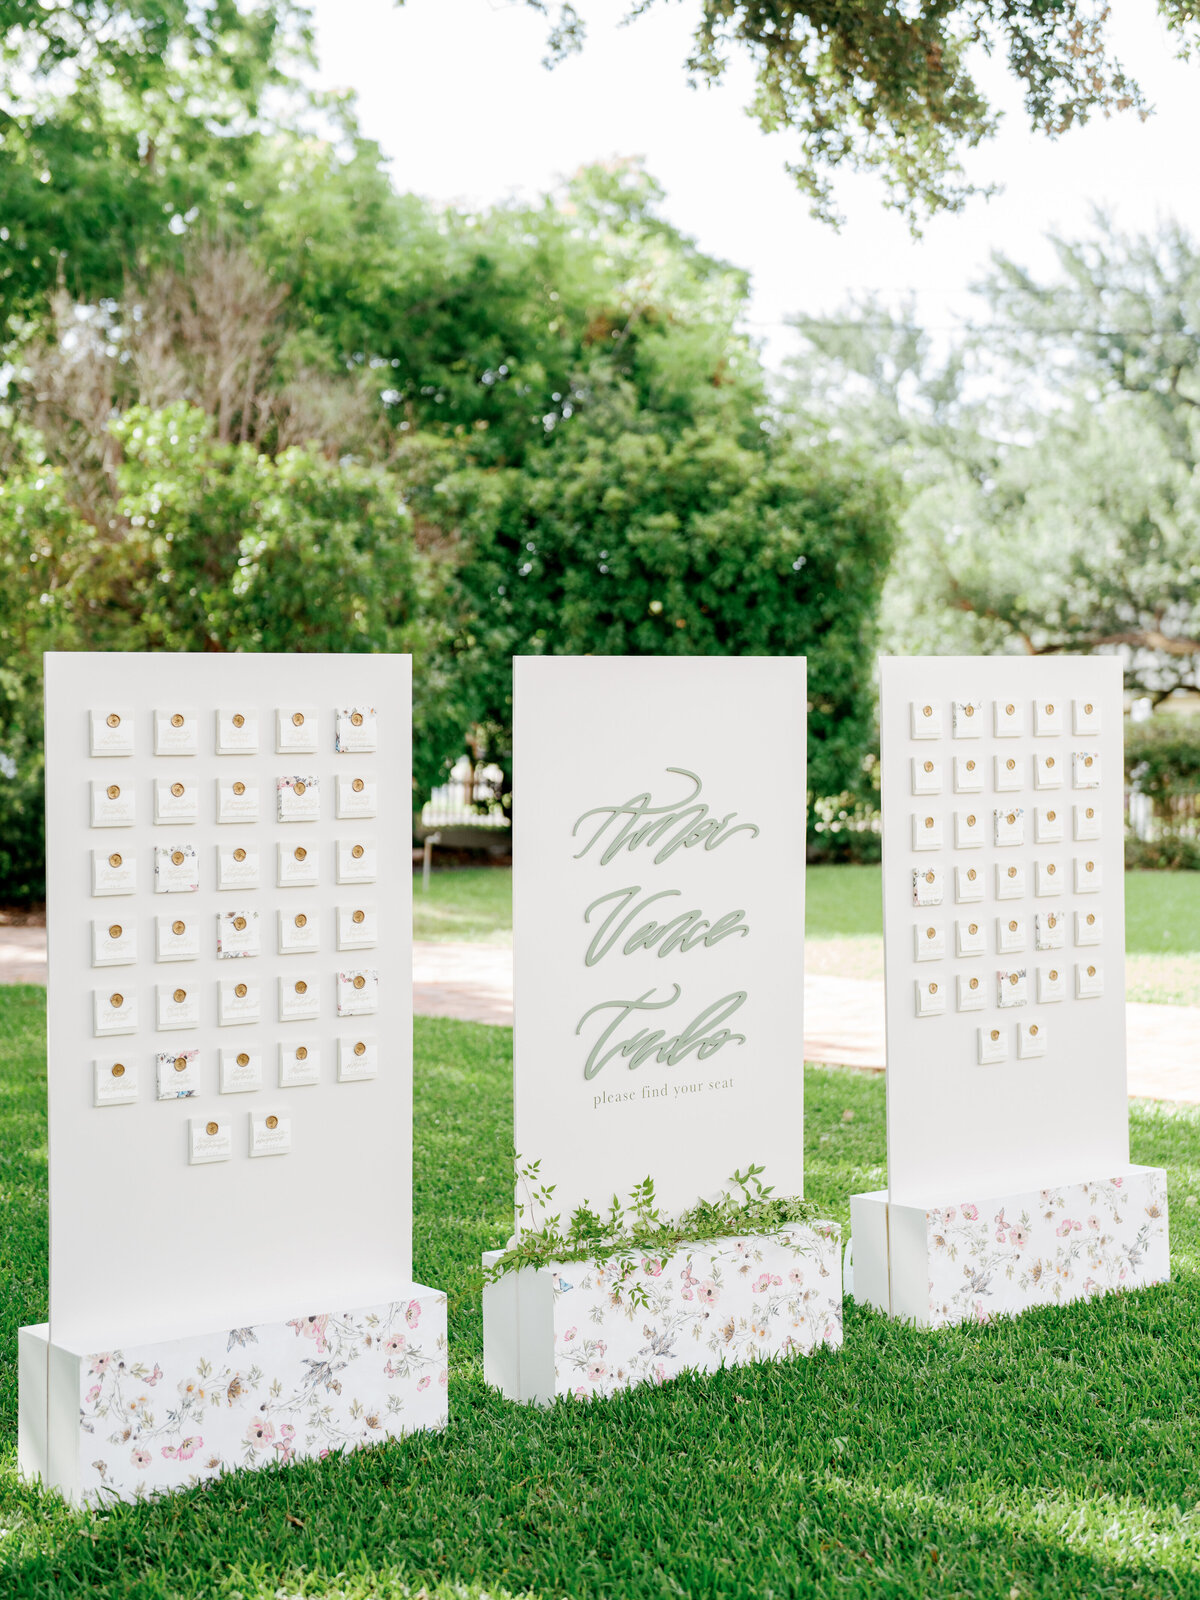 LBV Design House Wedding Design Planning Day-Of Signage Paper Goods Shoppable Accessories Wedding Day Austin, Texas beyond Valerie Strenk Lettered by Valerie Hand Lettering12